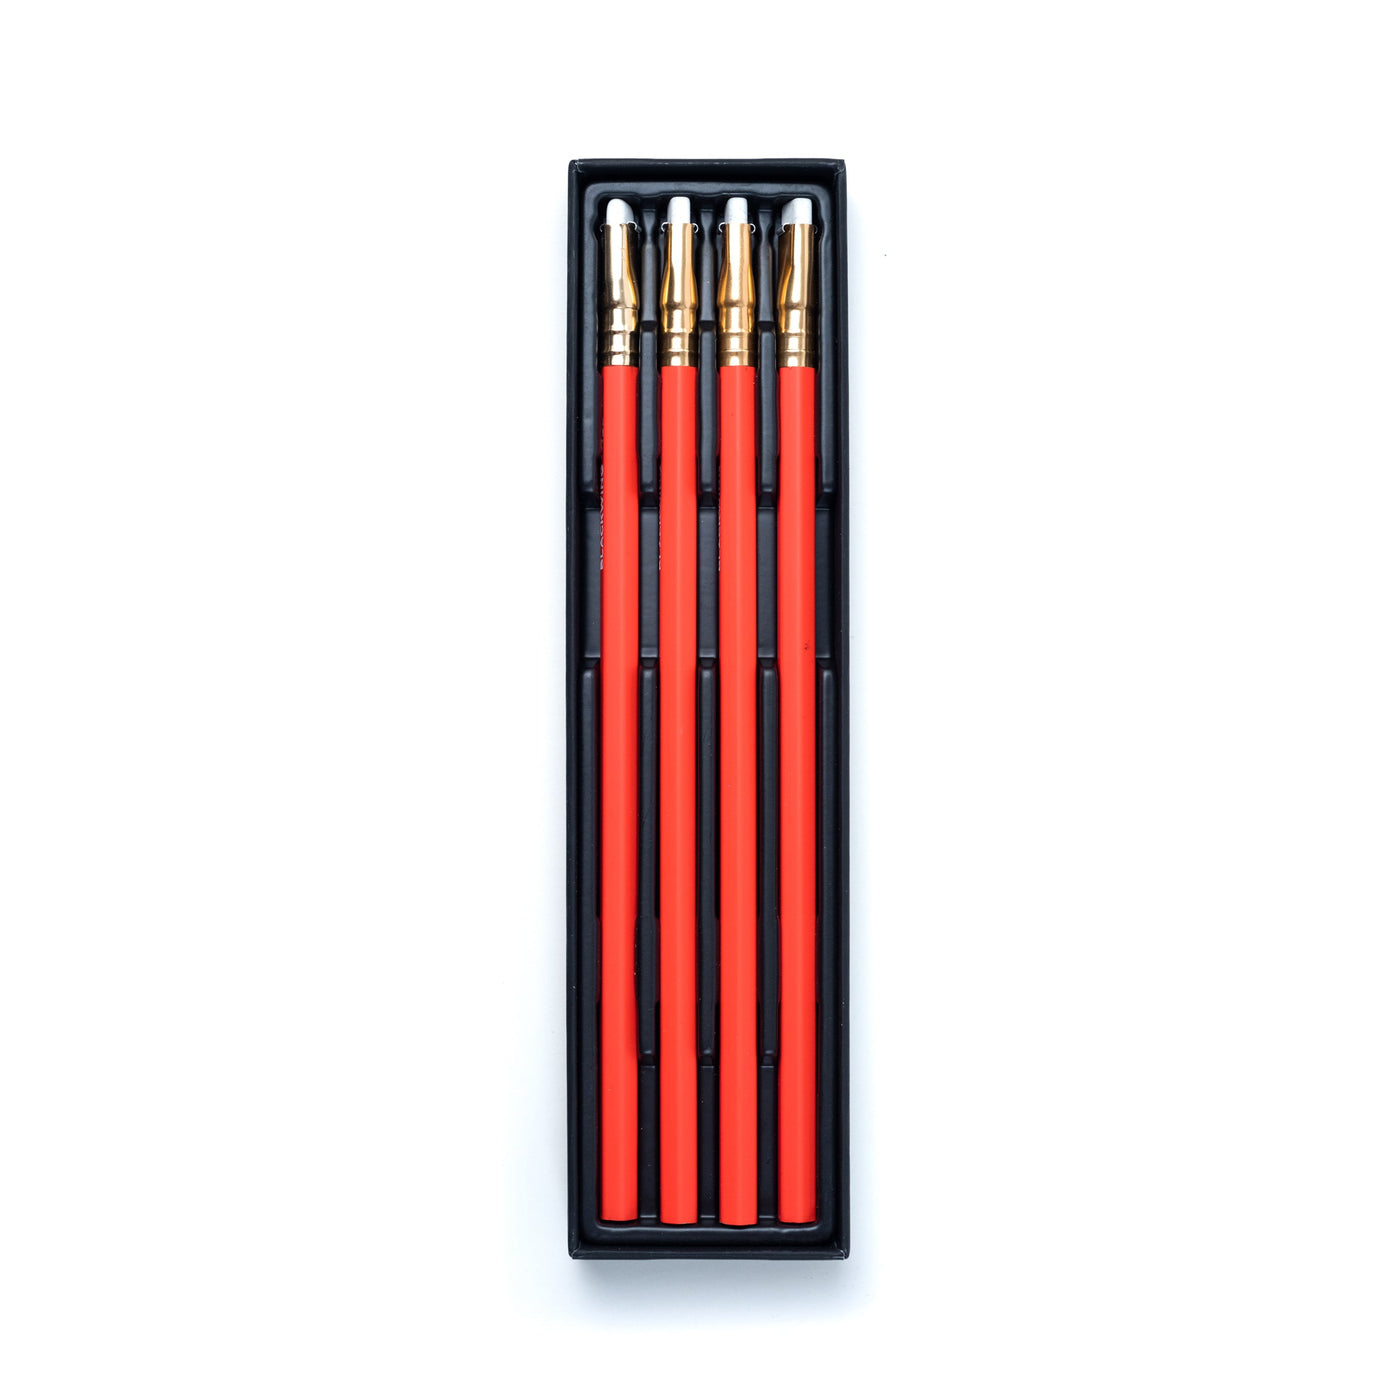 Blackwing Red Colored Pencils (Set of 4)